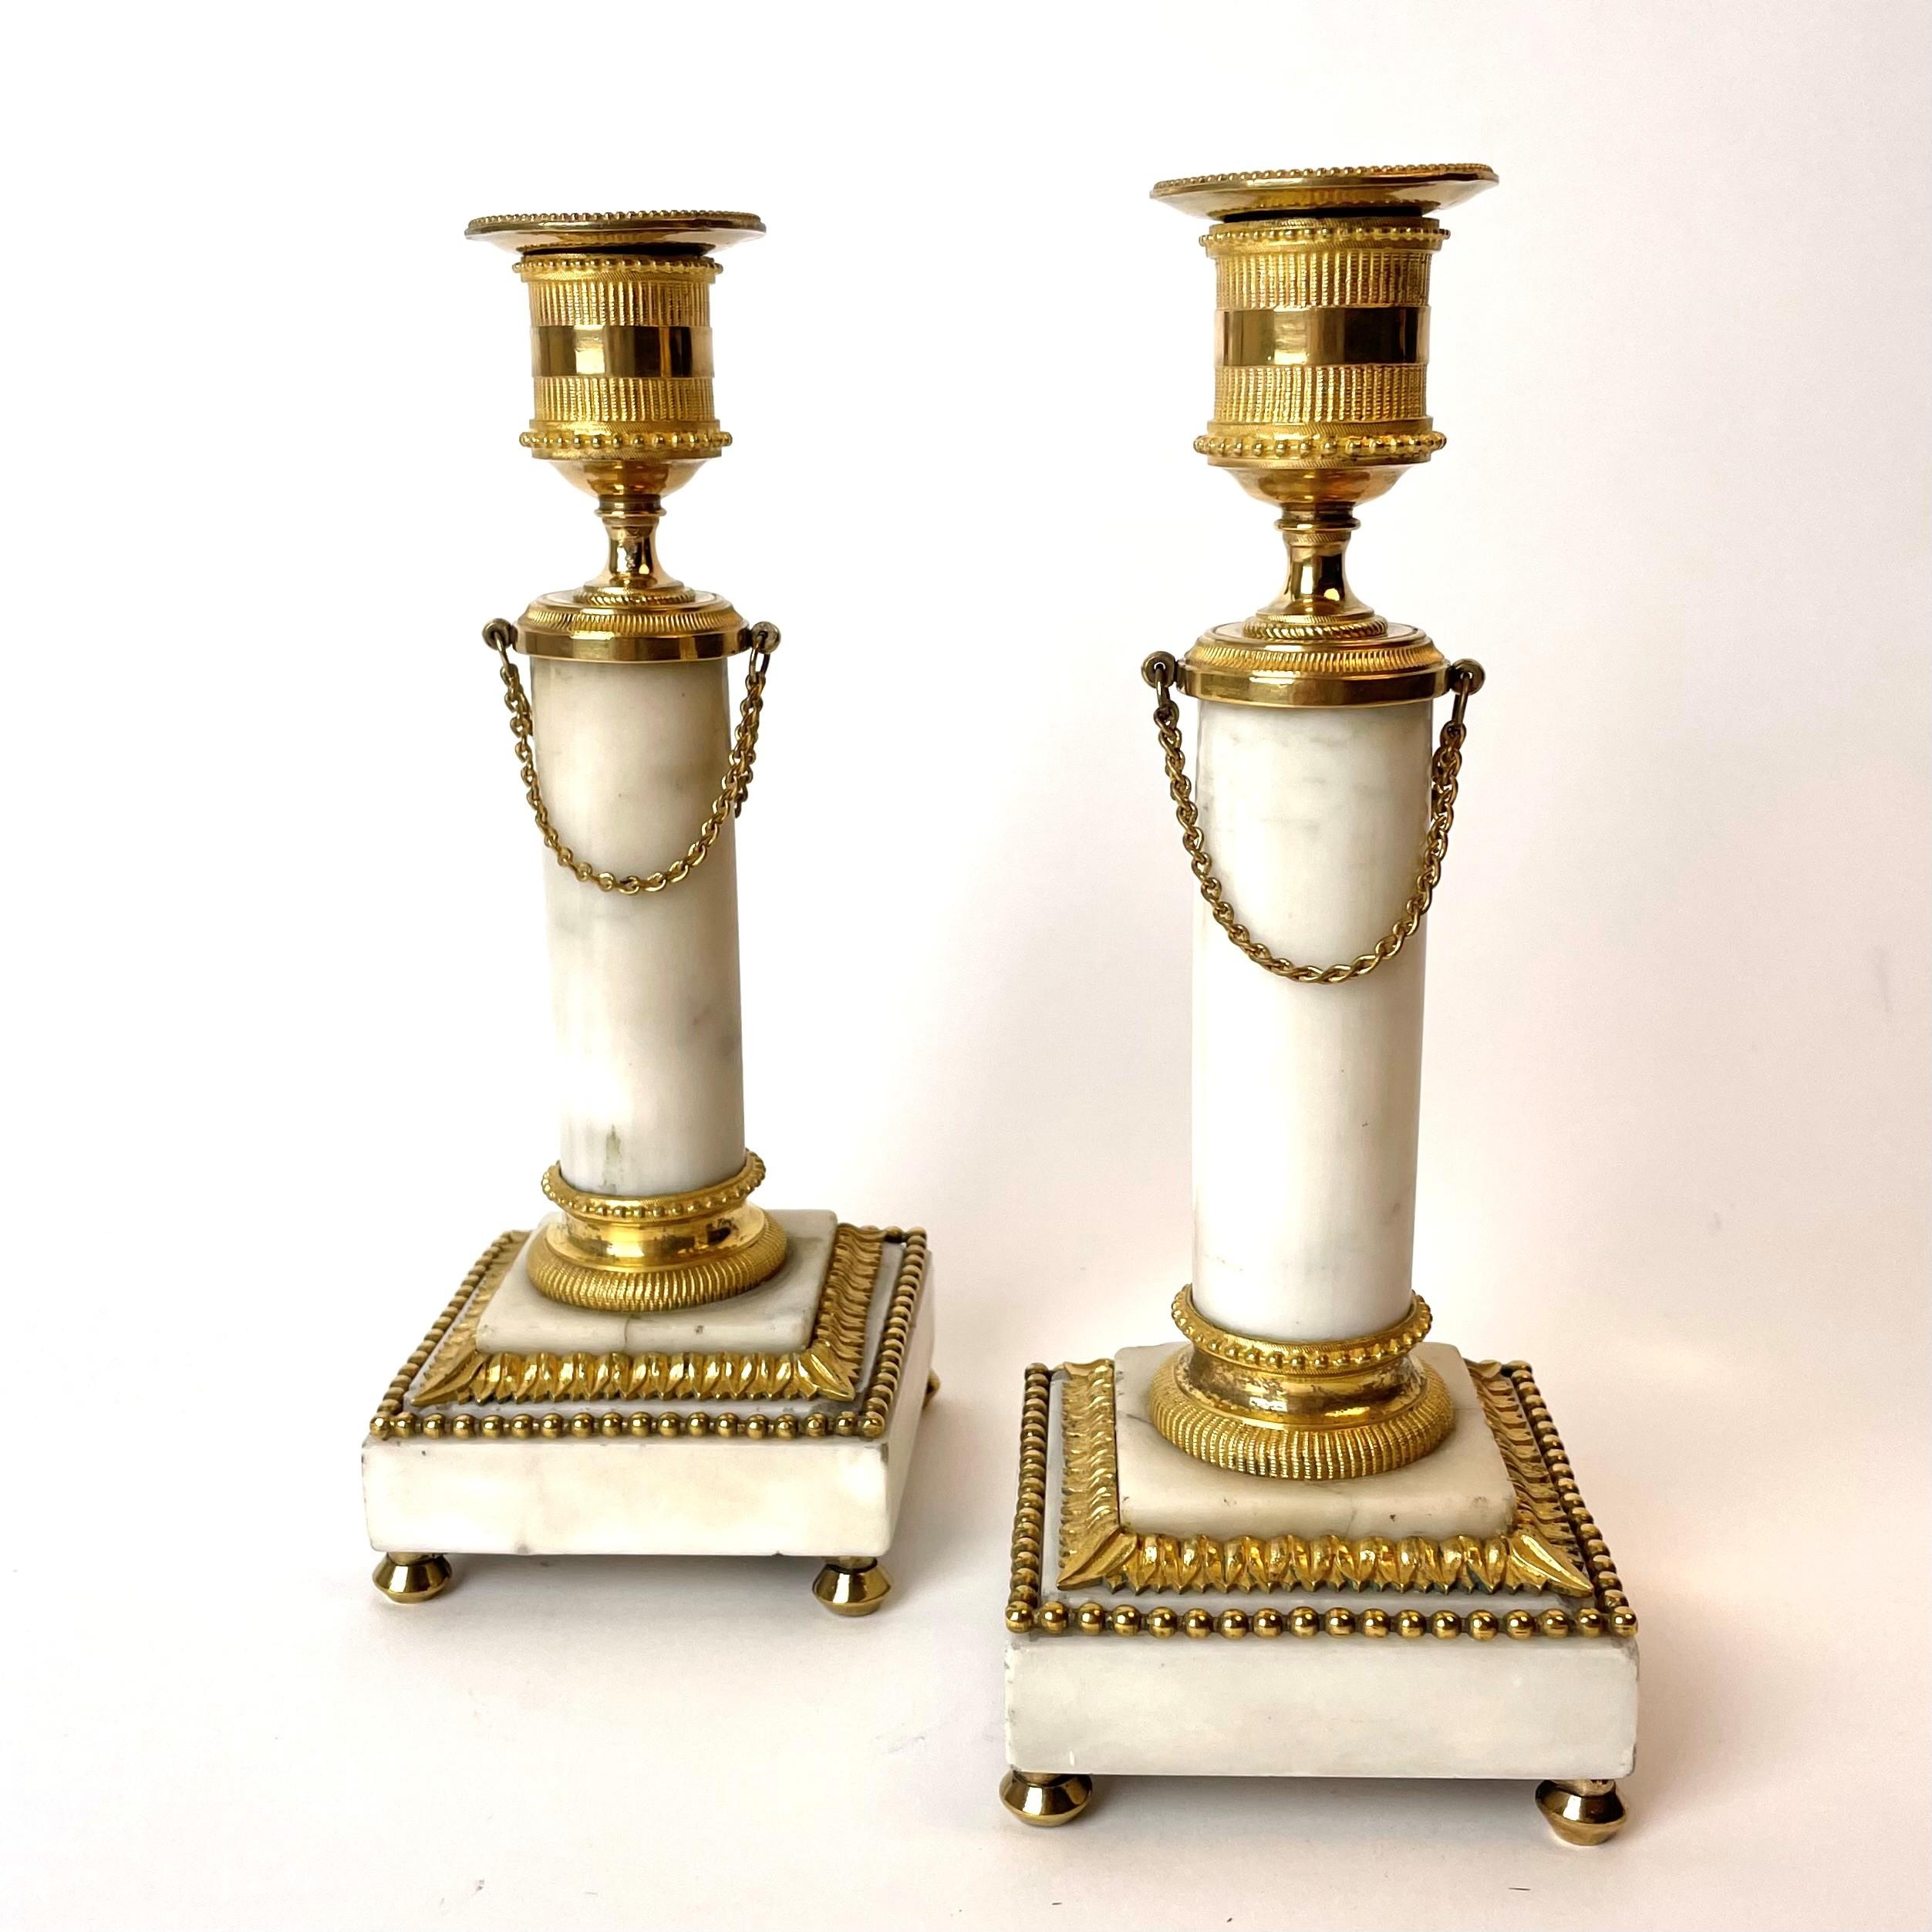 A pair sophisticated carrara marble and gilt bronze Candlesticks. Made in France during the 1780s. Louis XVI.

Beautiful contrast between the white Carrara marble and the gilded decor.

There are some cracks in the marble (see pictures) and the